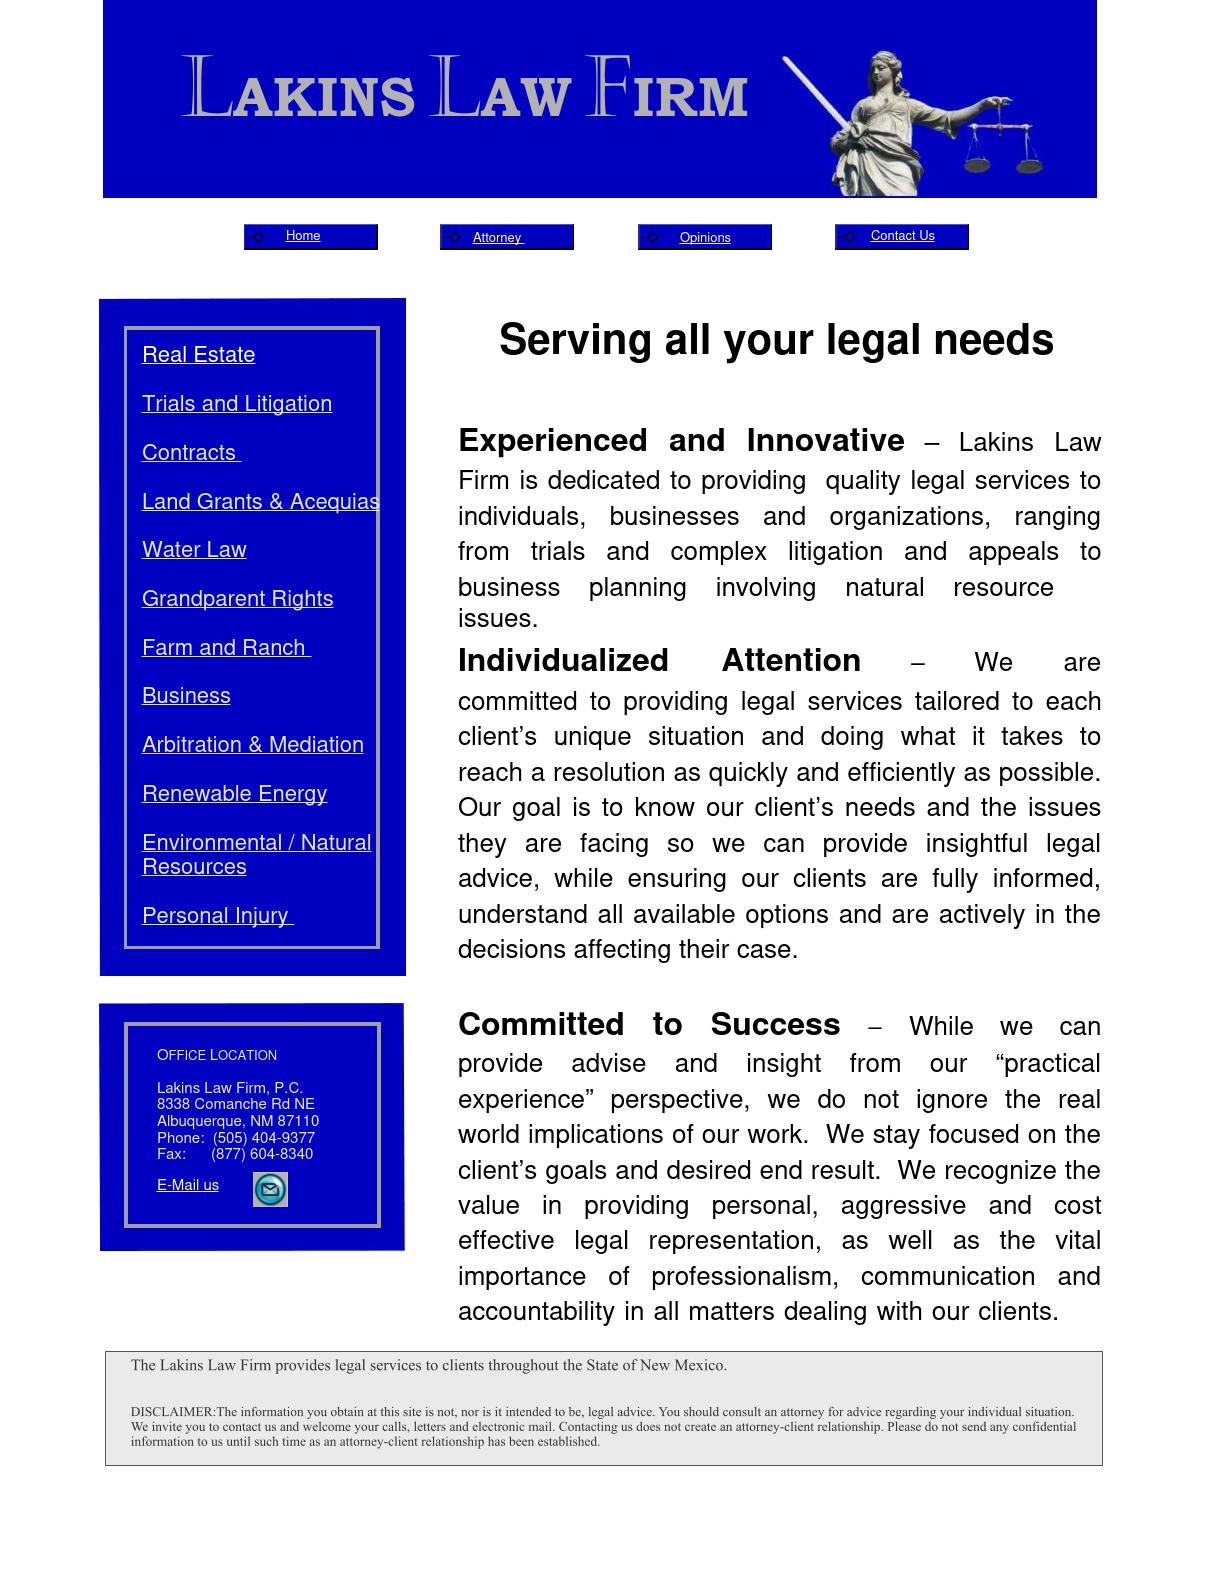 Lakins Law Firm - Albuquerque NM Lawyers